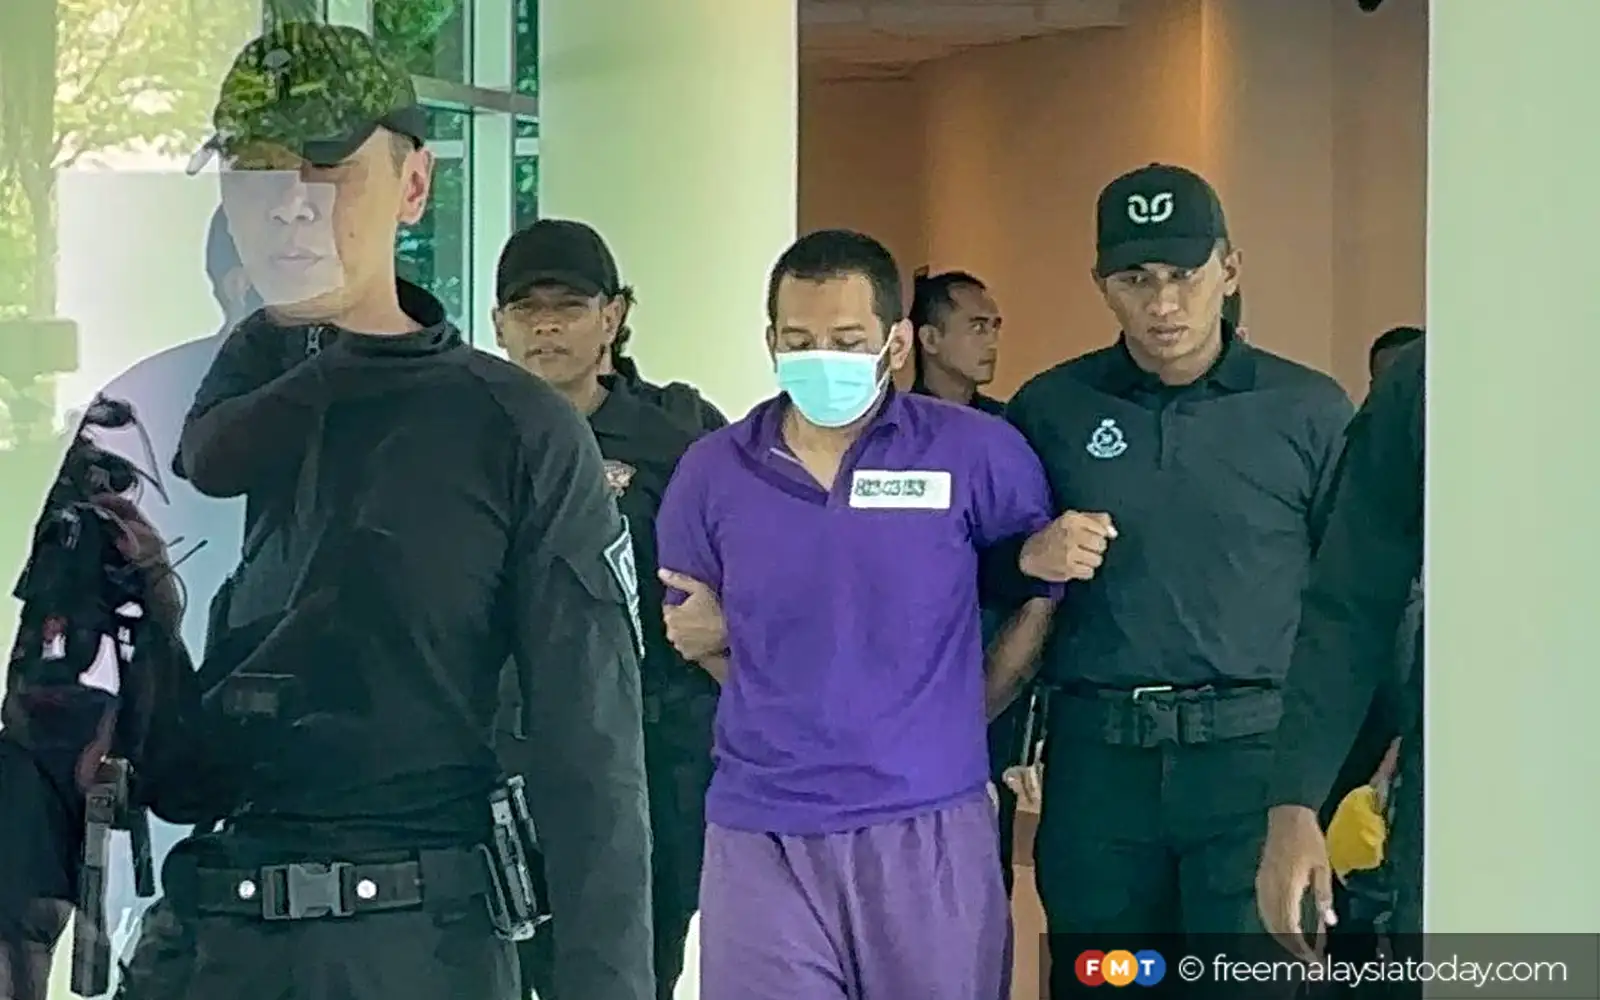 klia shooting suspect to be charged tomorrow